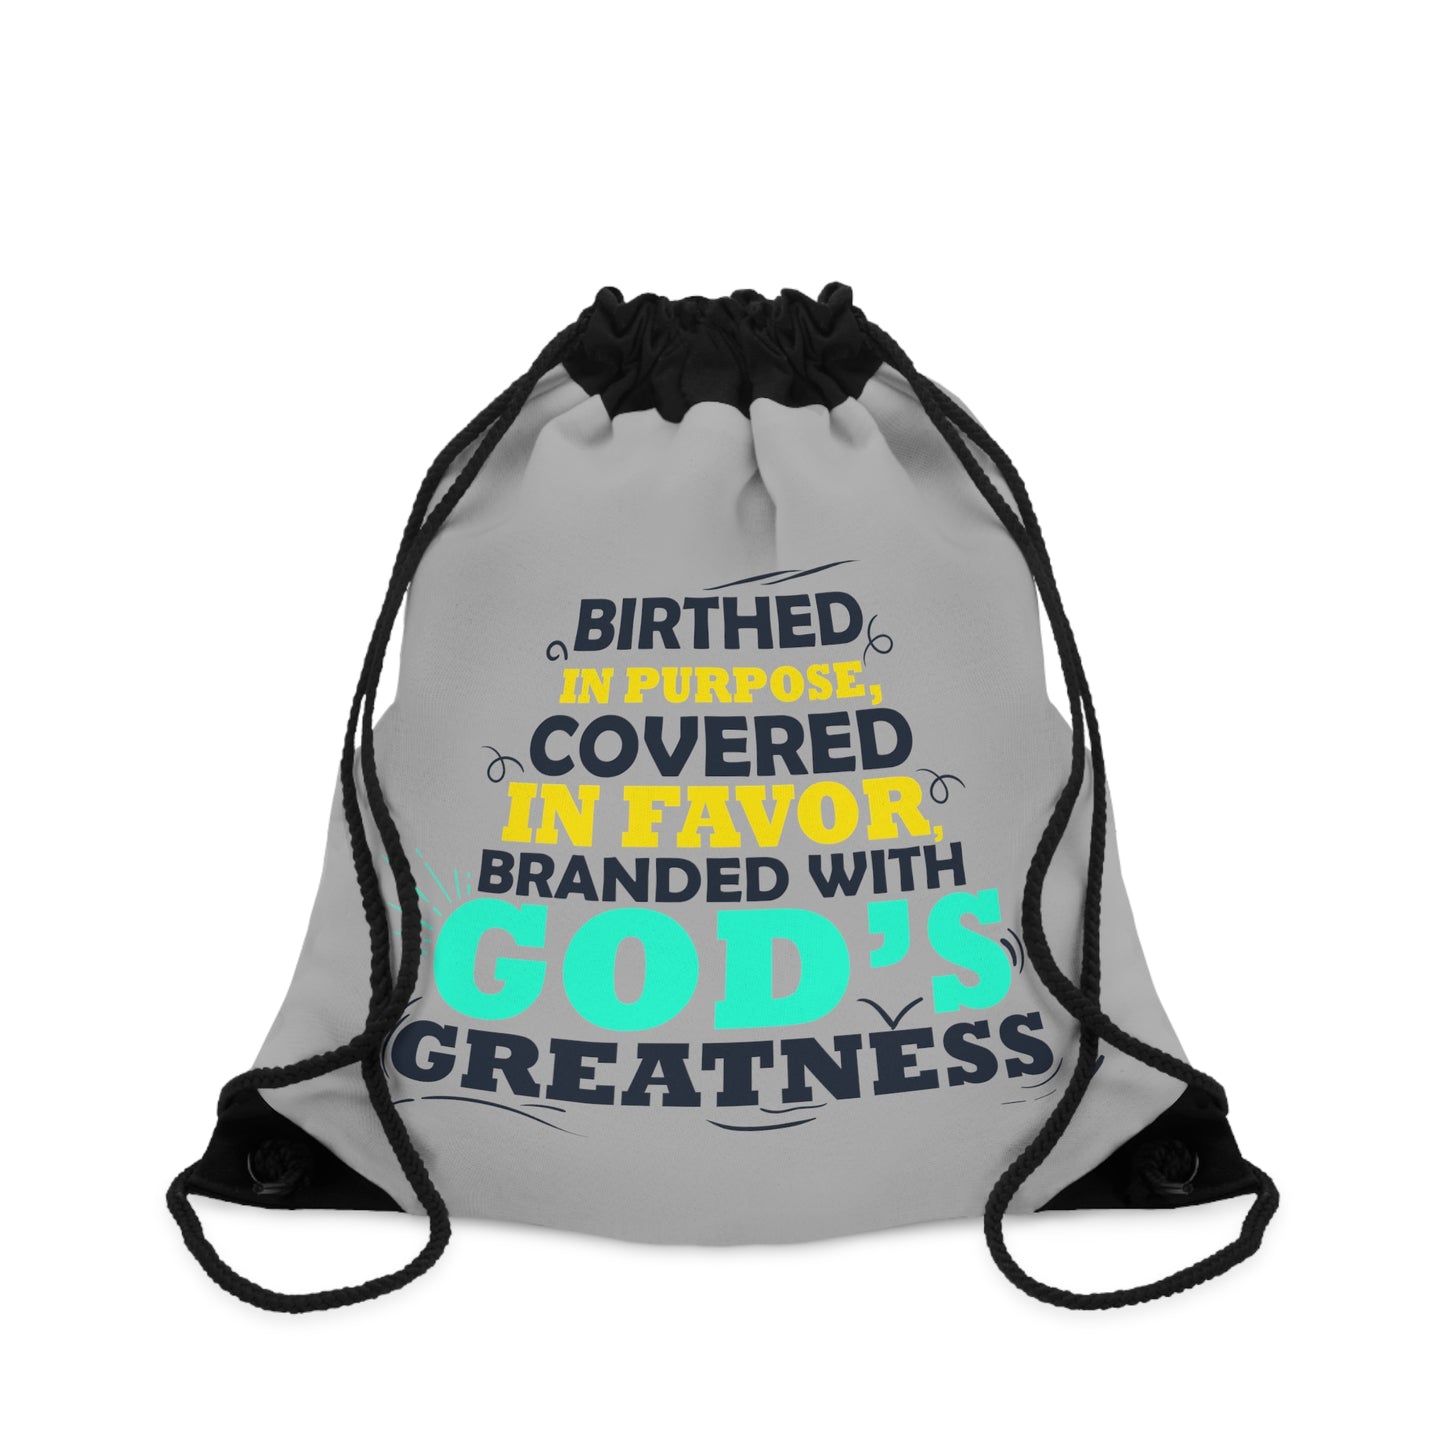 Birthed In Purpose Covered In Faver Branded With God's Greatness Drawstring Bag